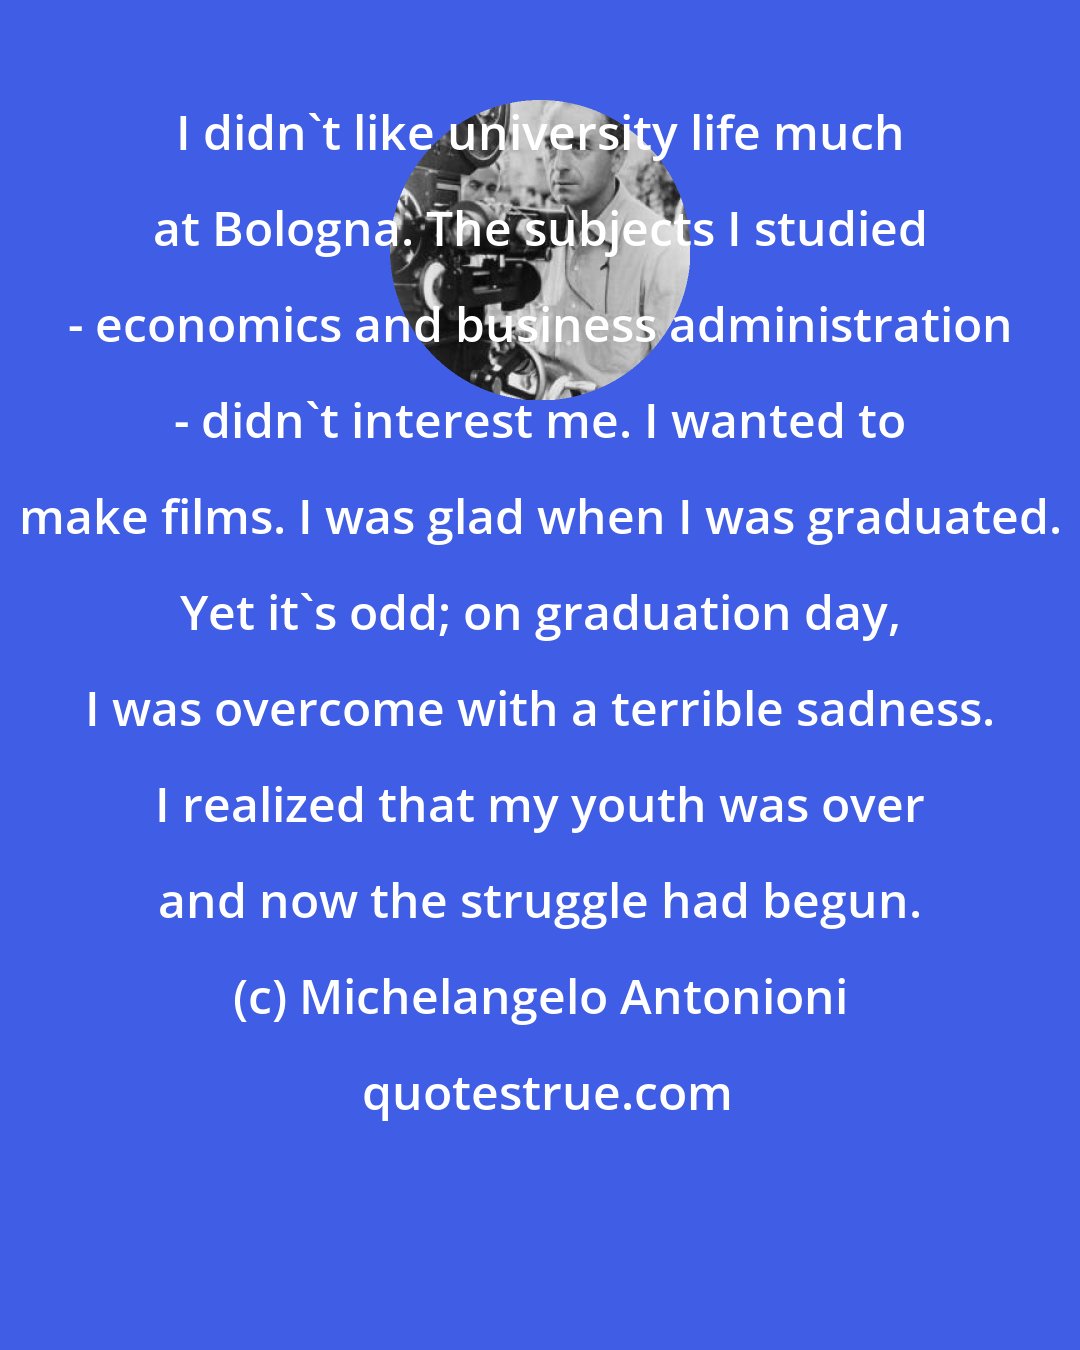 Michelangelo Antonioni: I didn't like university life much at Bologna. The subjects I studied - economics and business administration - didn't interest me. I wanted to make films. I was glad when I was graduated. Yet it's odd; on graduation day, I was overcome with a terrible sadness. I realized that my youth was over and now the struggle had begun.